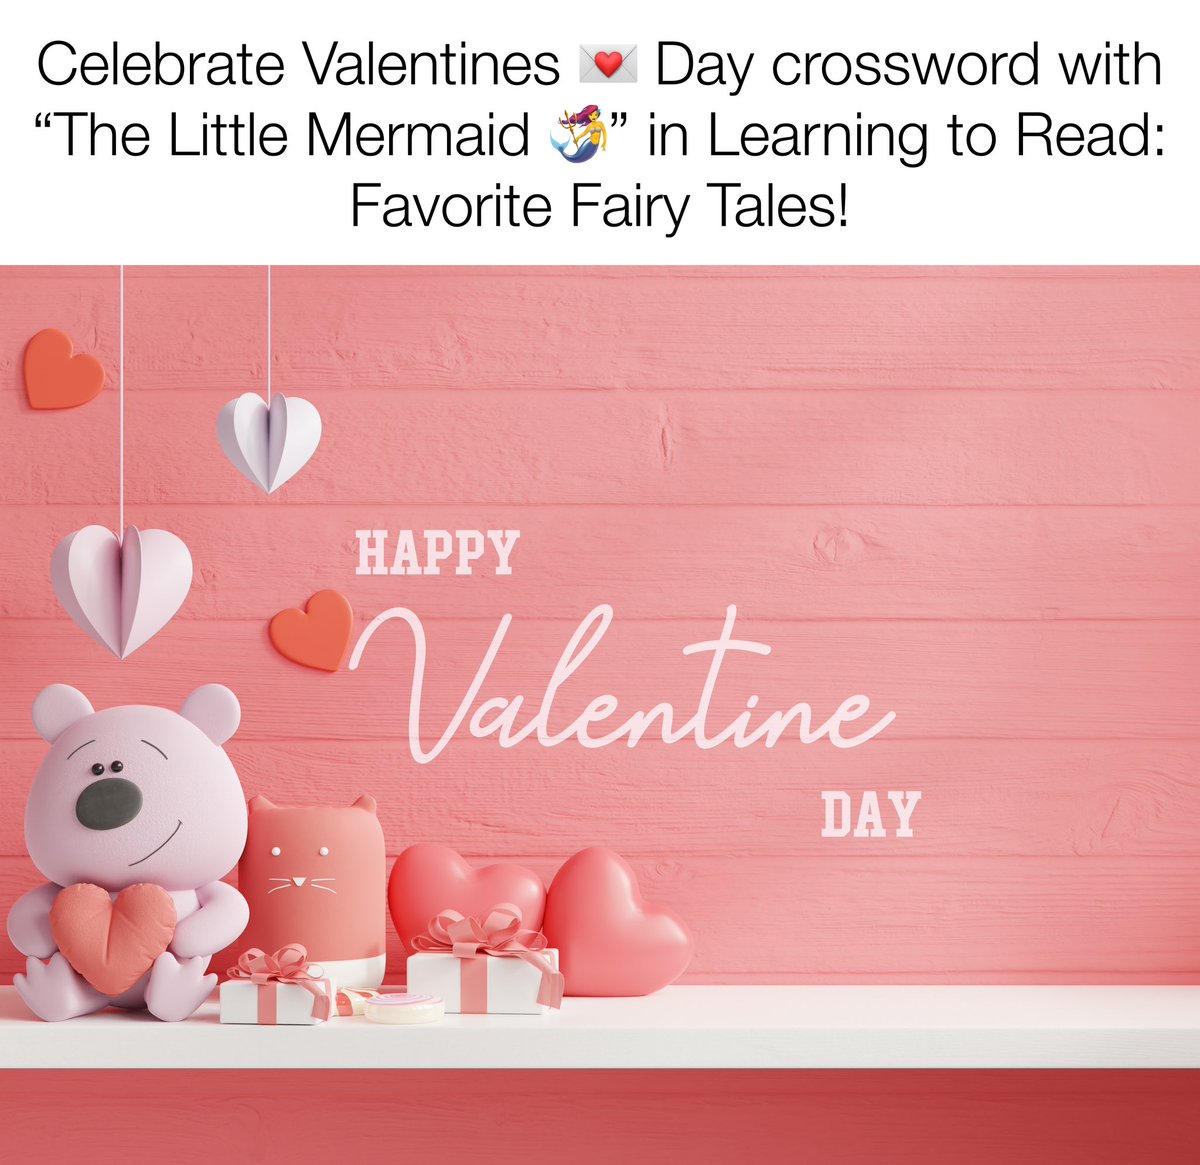 Play 💘 Valentines Day crossword with the “Little Mermaid” in Learning to Read: Favorite Fairy Tales! christiansforever.com/happy-valentin… #ValentinesDaycrossword #love #audiobooks #childrensaudiobooks #childrensaudiobook